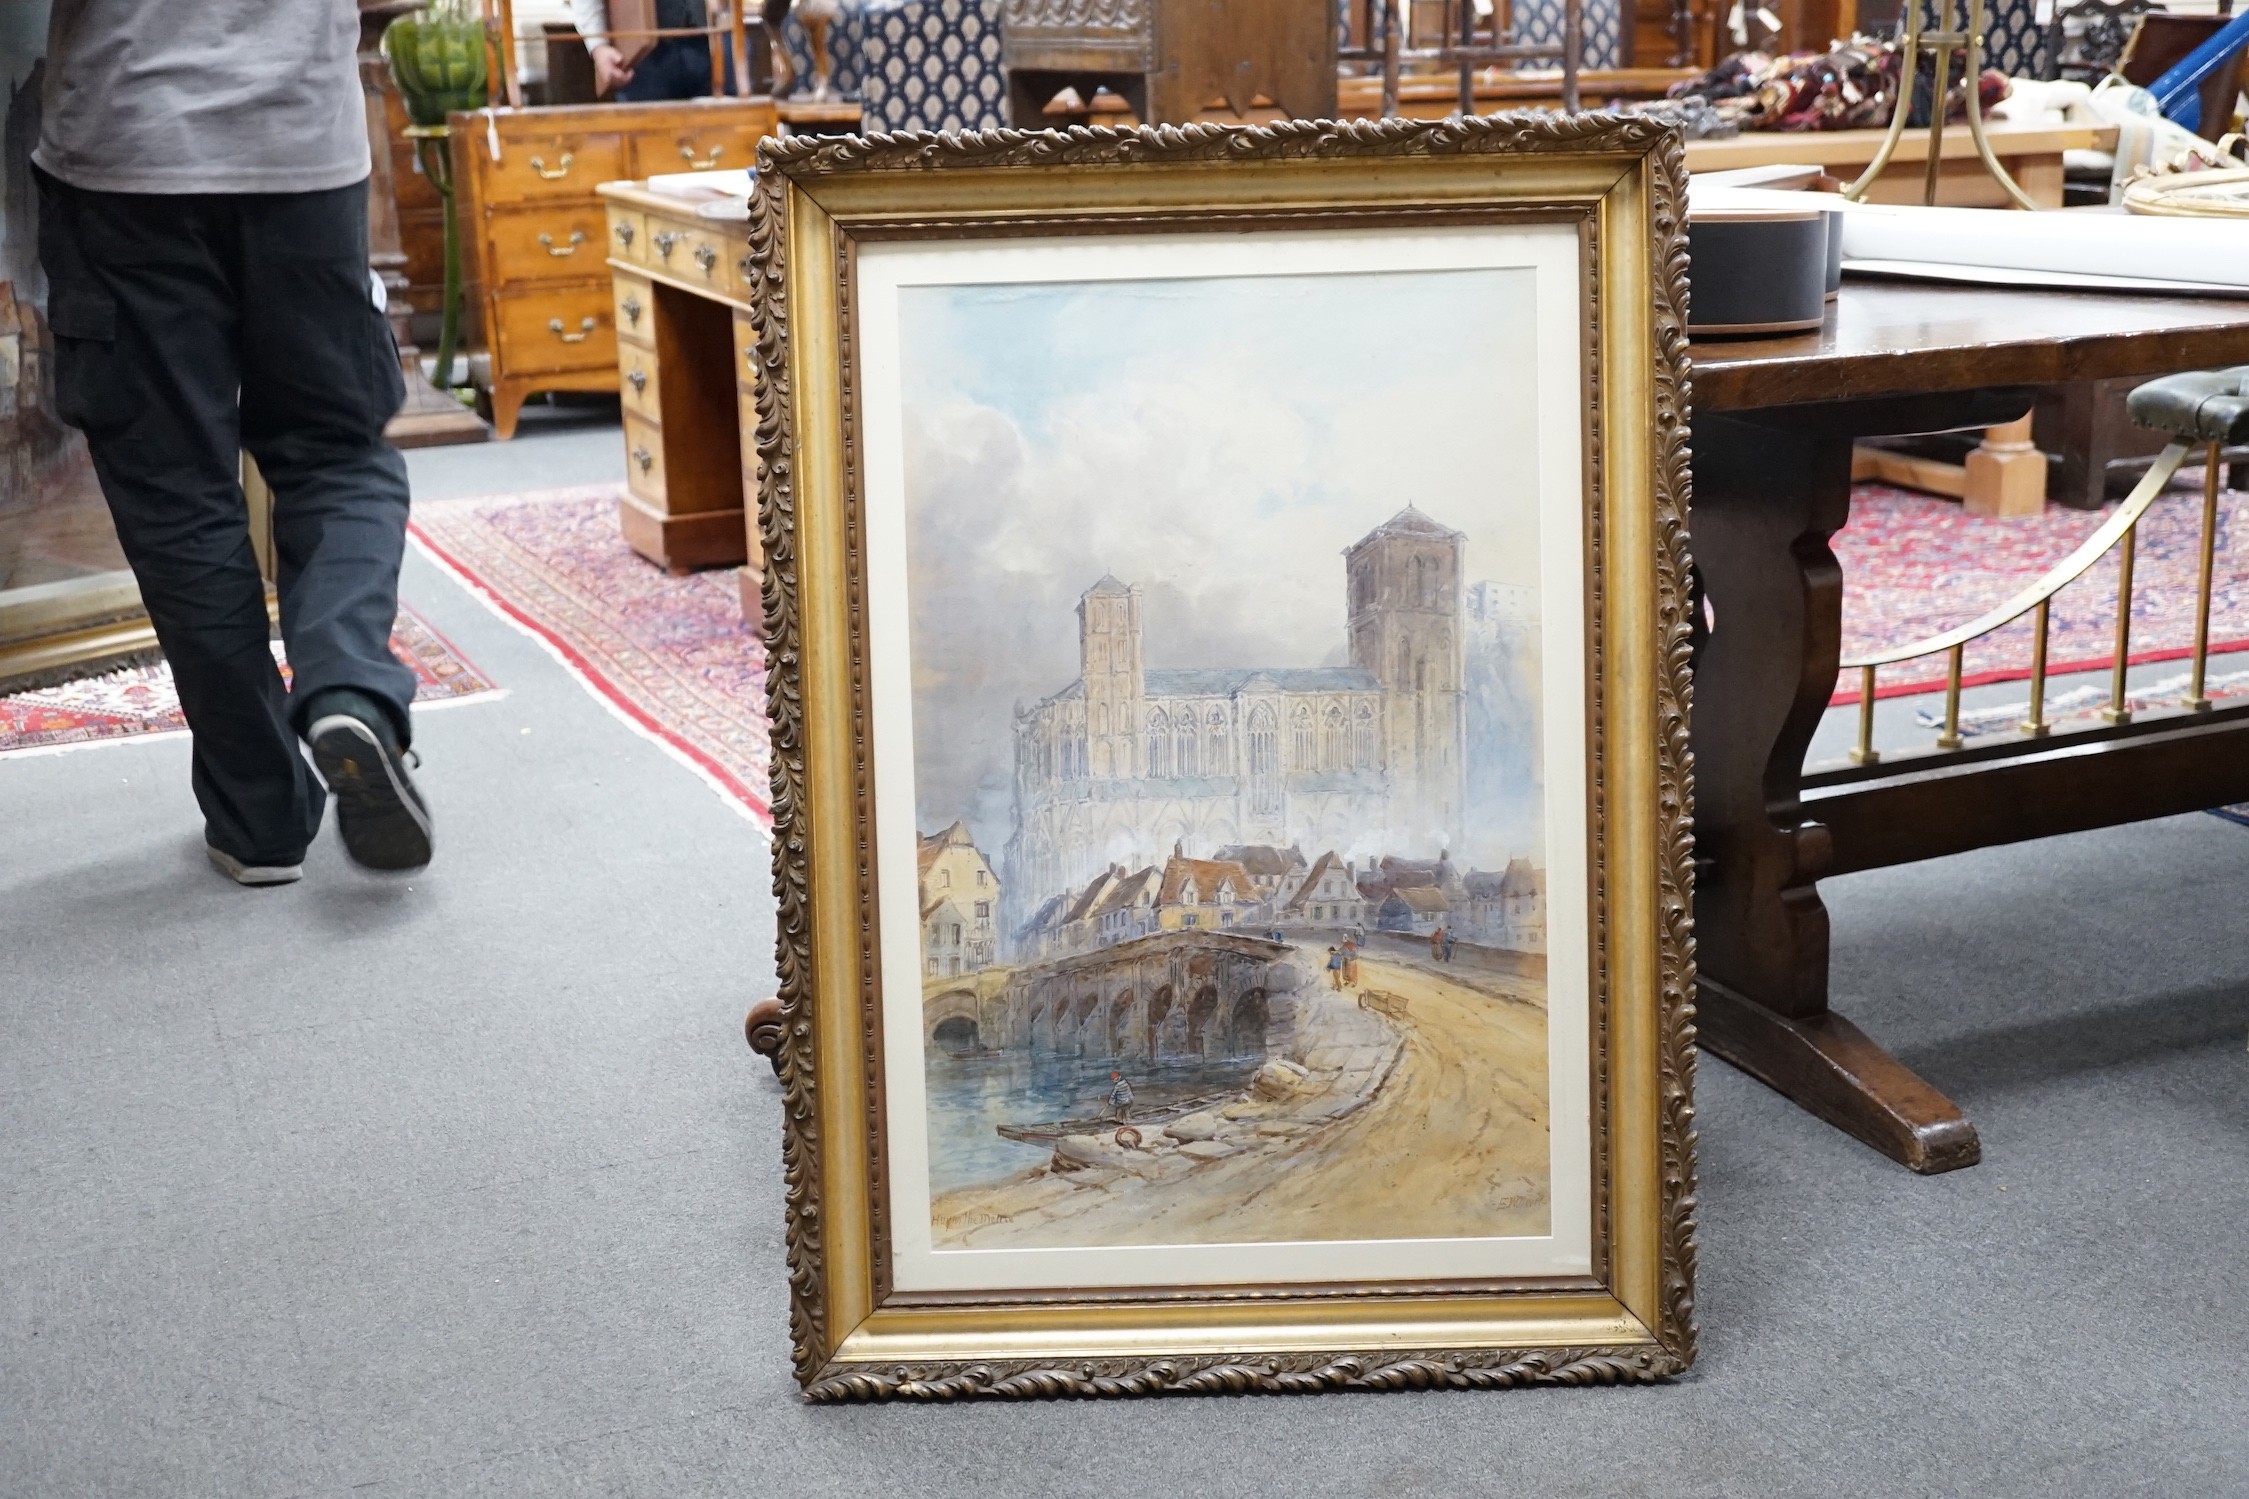 E. W. Nevil, pair of watercolours, 'Frankfort' and 'Huy on The Meuse', signed and titled, 75 x 48cm